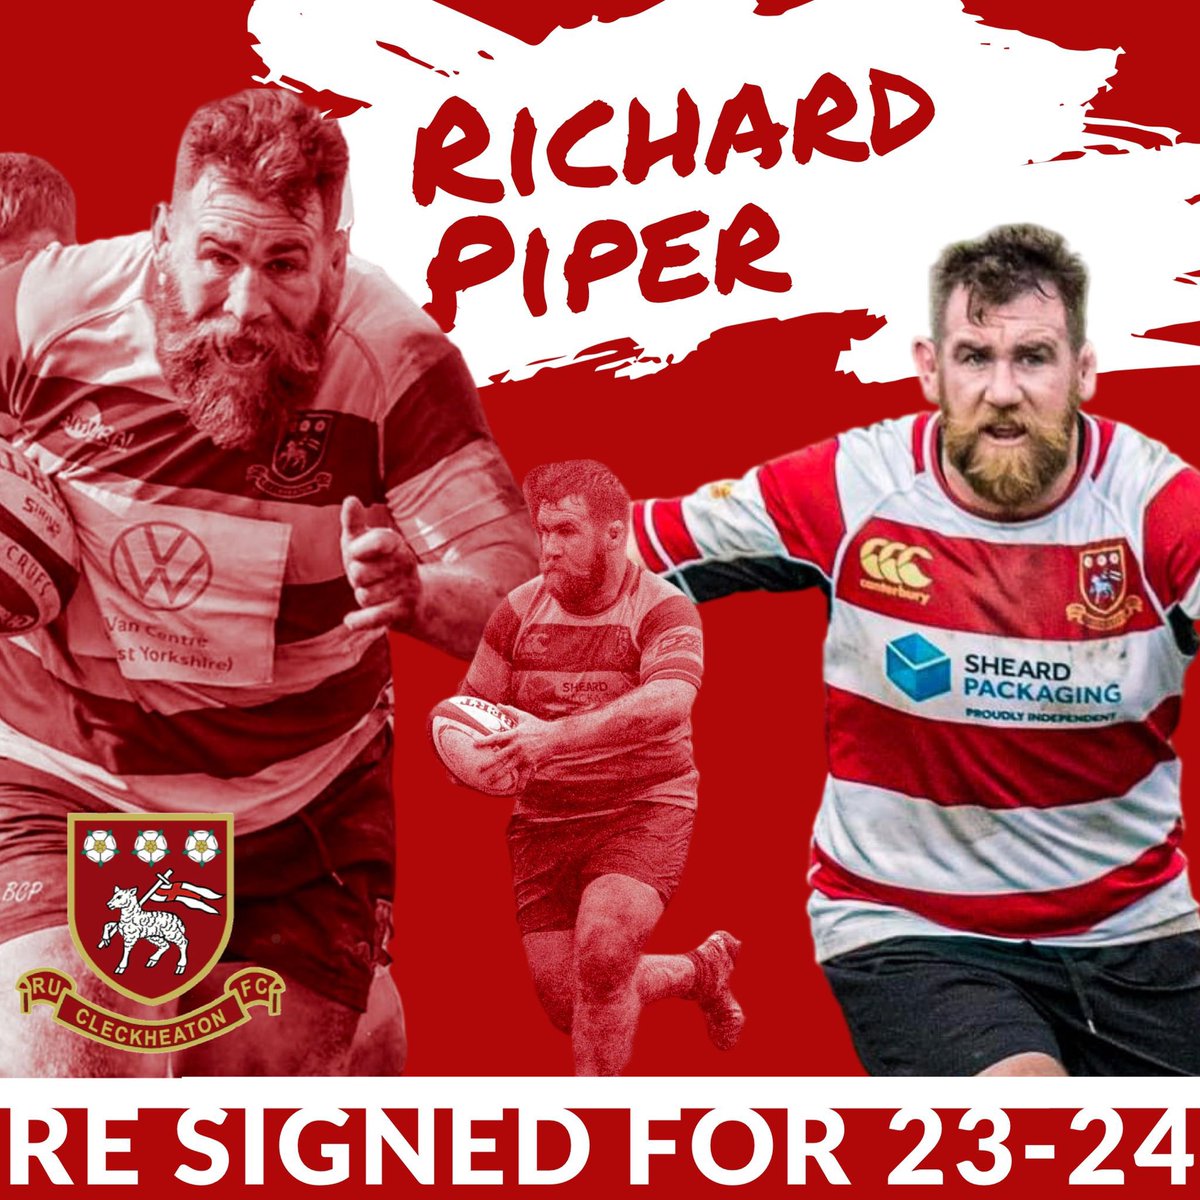 @dickpiper  has also put pen to paper and resigned for the 23/24 season. 

Dicko missed the second half of last season due to ankle surgery and is looking forward to getting going again 🐑  ⚪️🔴⚪️🔴⚪️